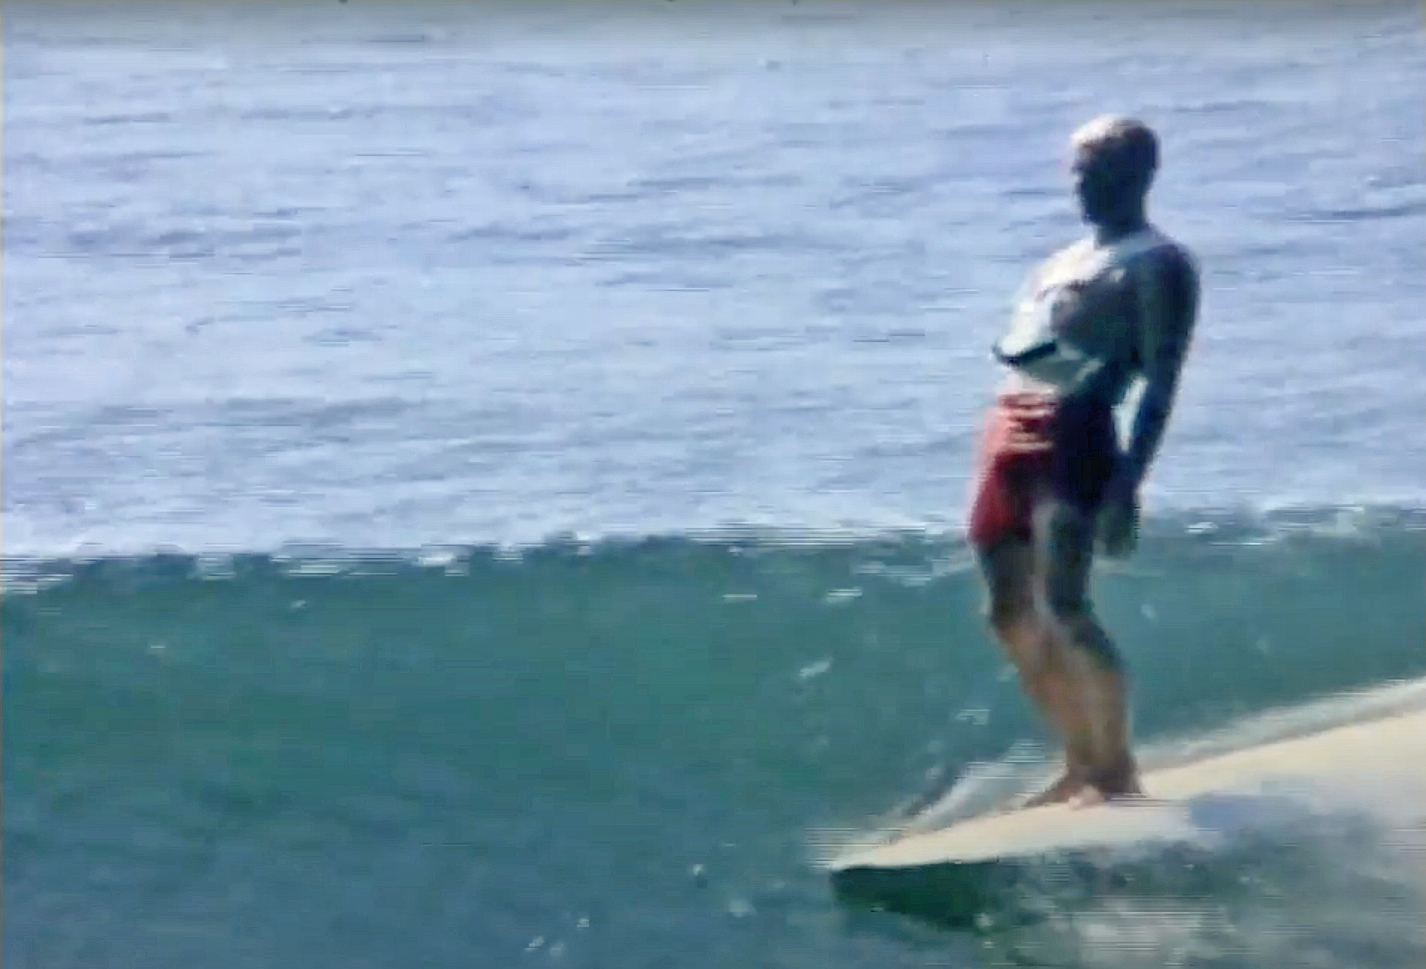 Image 3 for 1964 Malibu Invitational – and how flash is the surfing?!